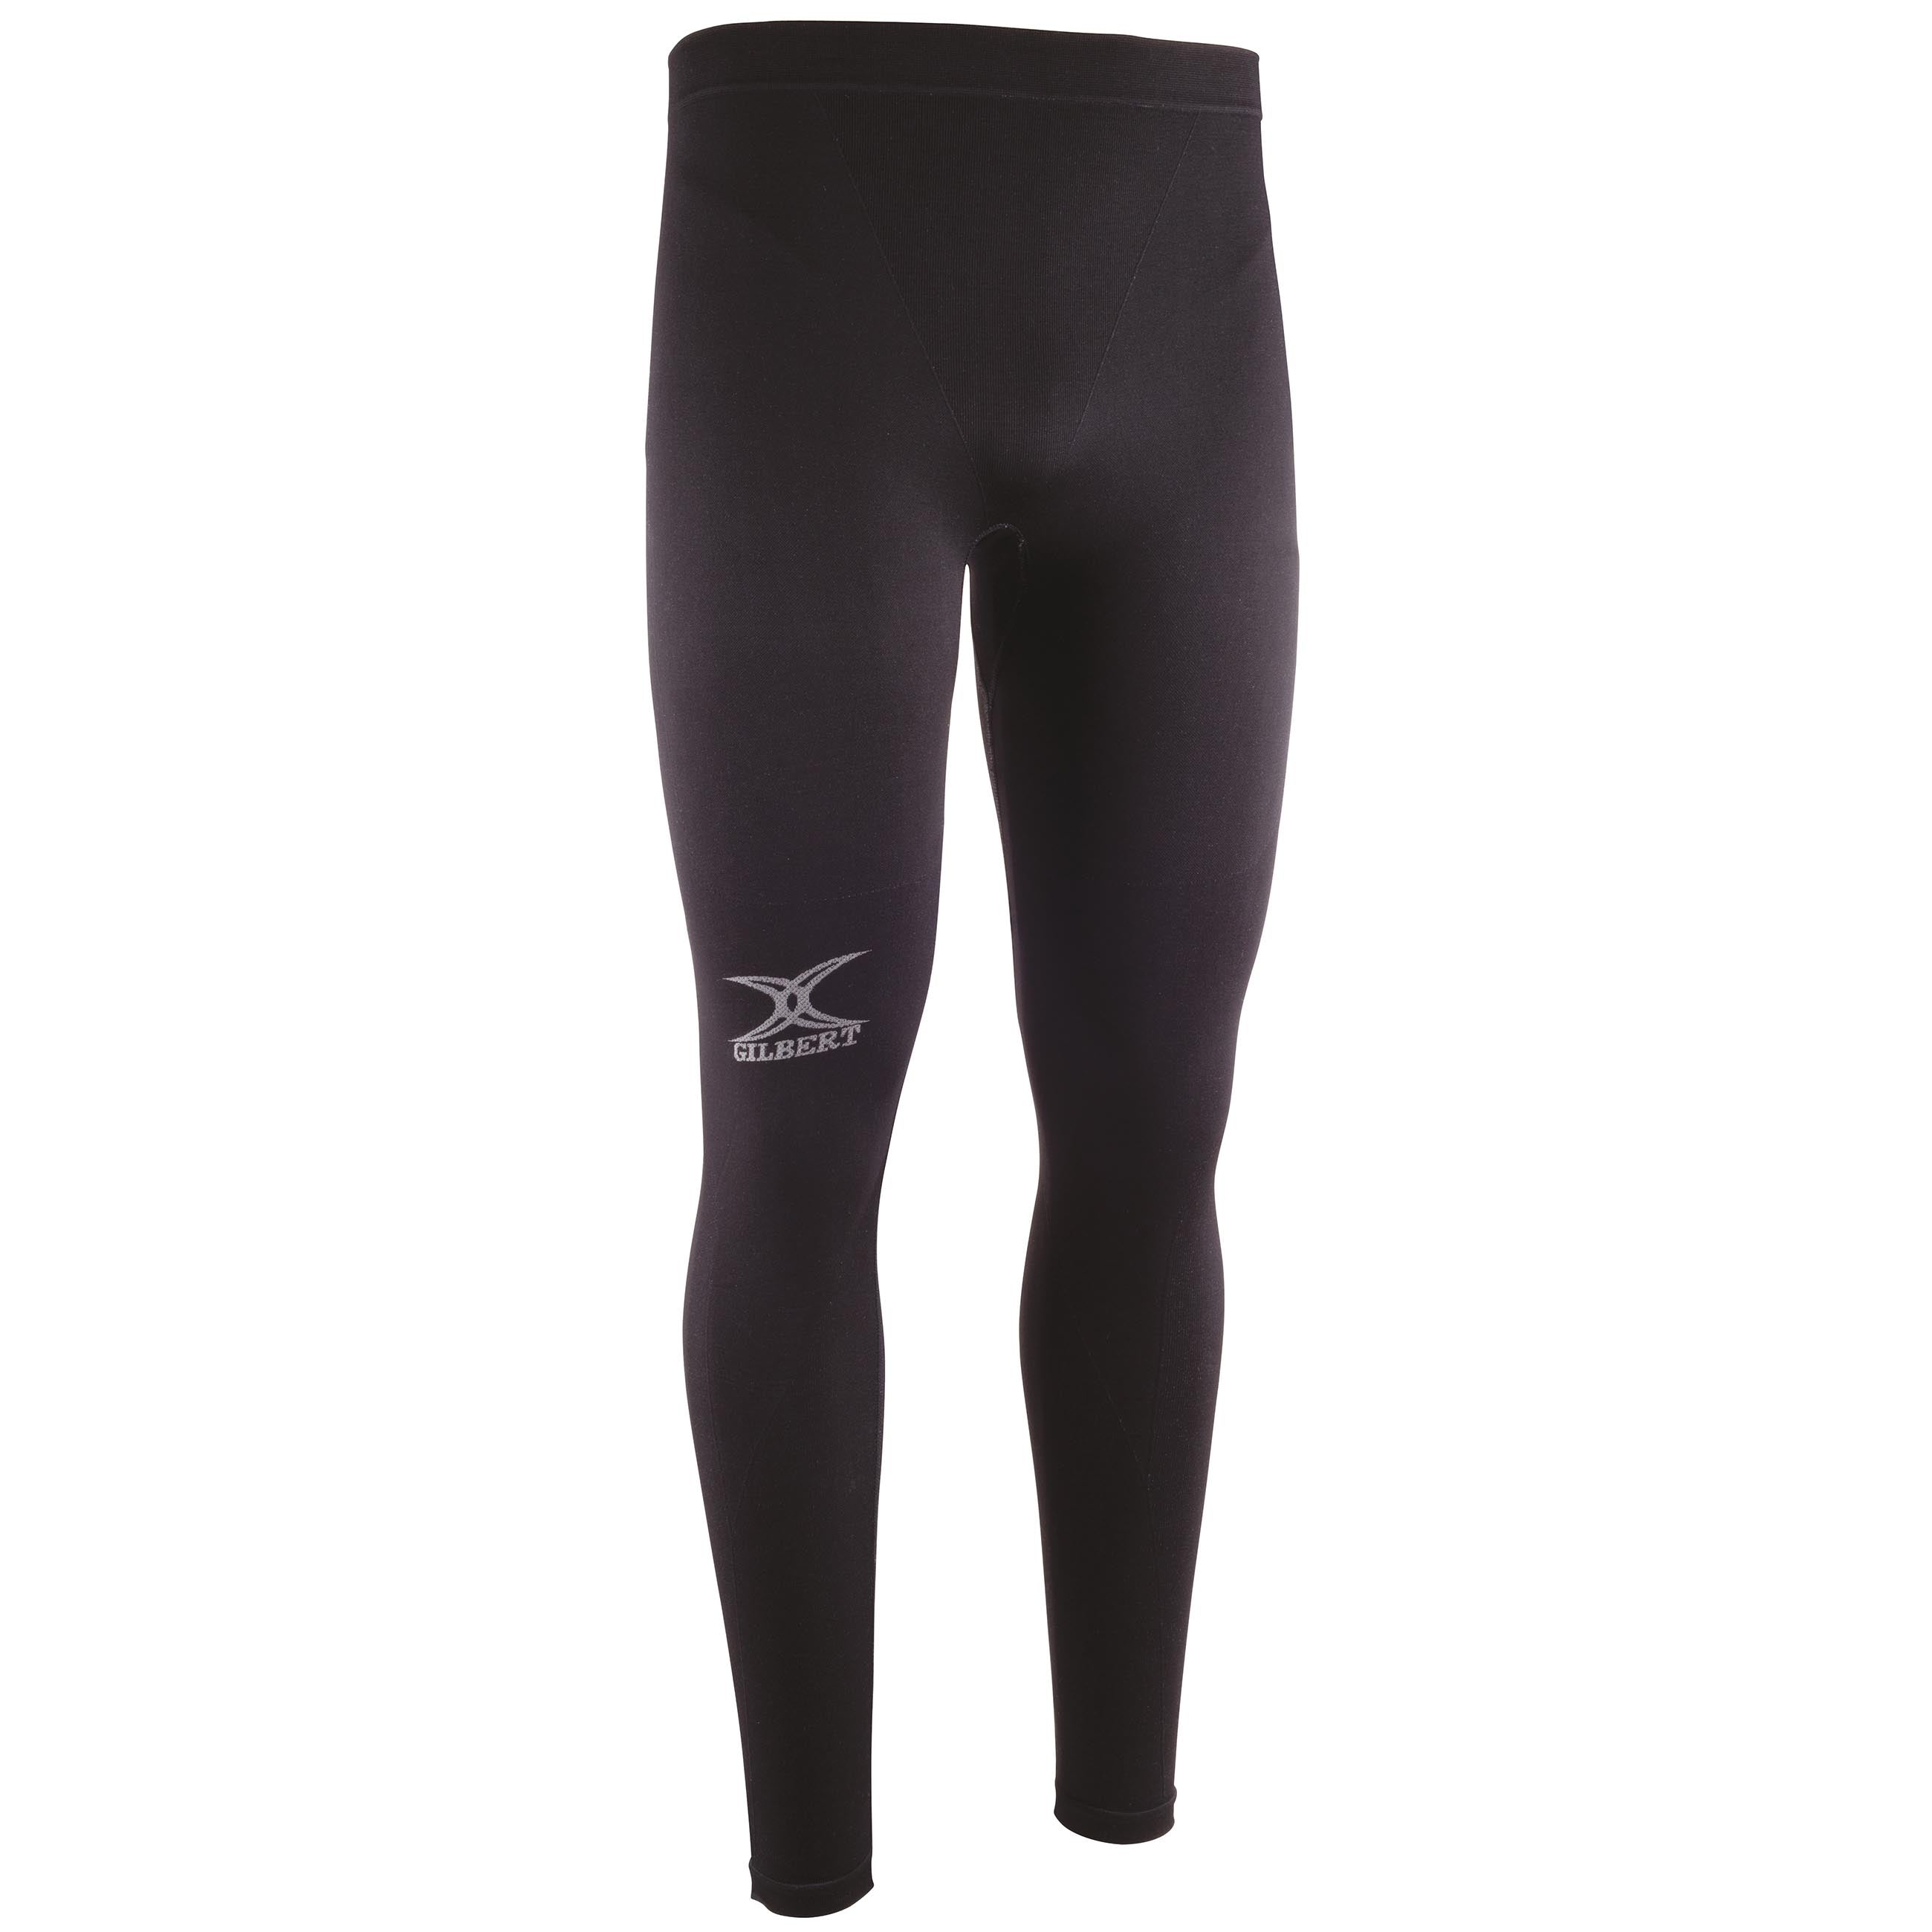 Tops, Compression Tights, Under Armour Base Layers, Imm-cnrShops